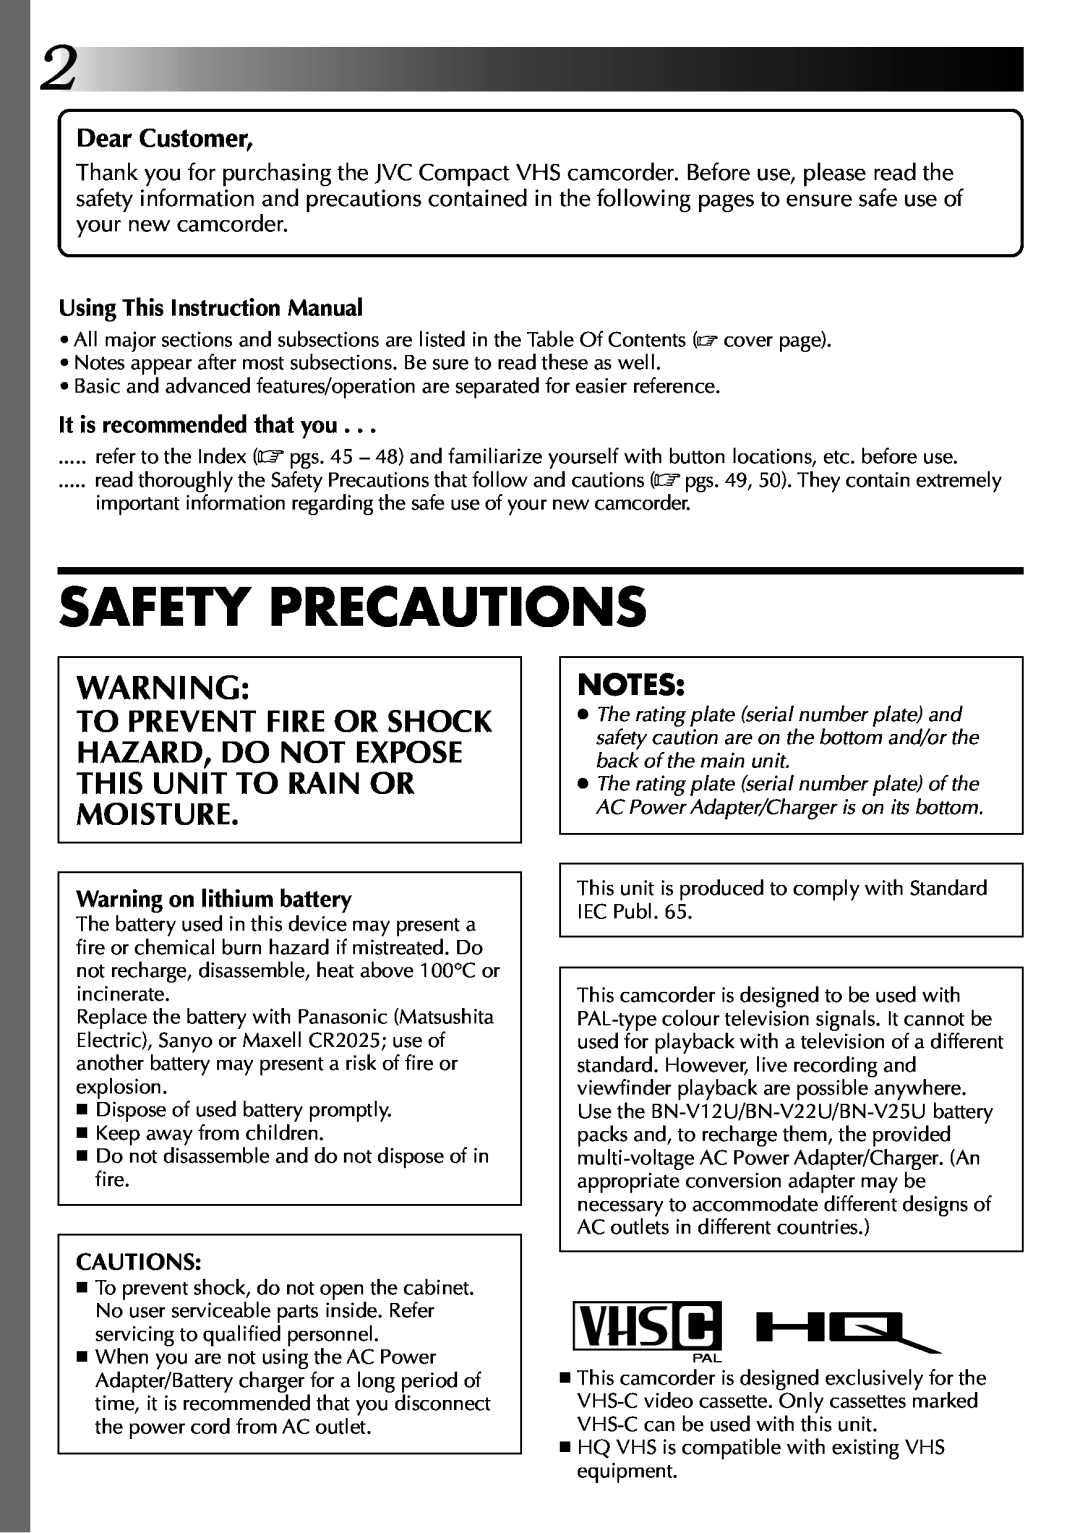 JVC LYT0002-048A Dear Customer, Safety Precautions, Using This Instruction Manual, It is recommended that you, Cautions 